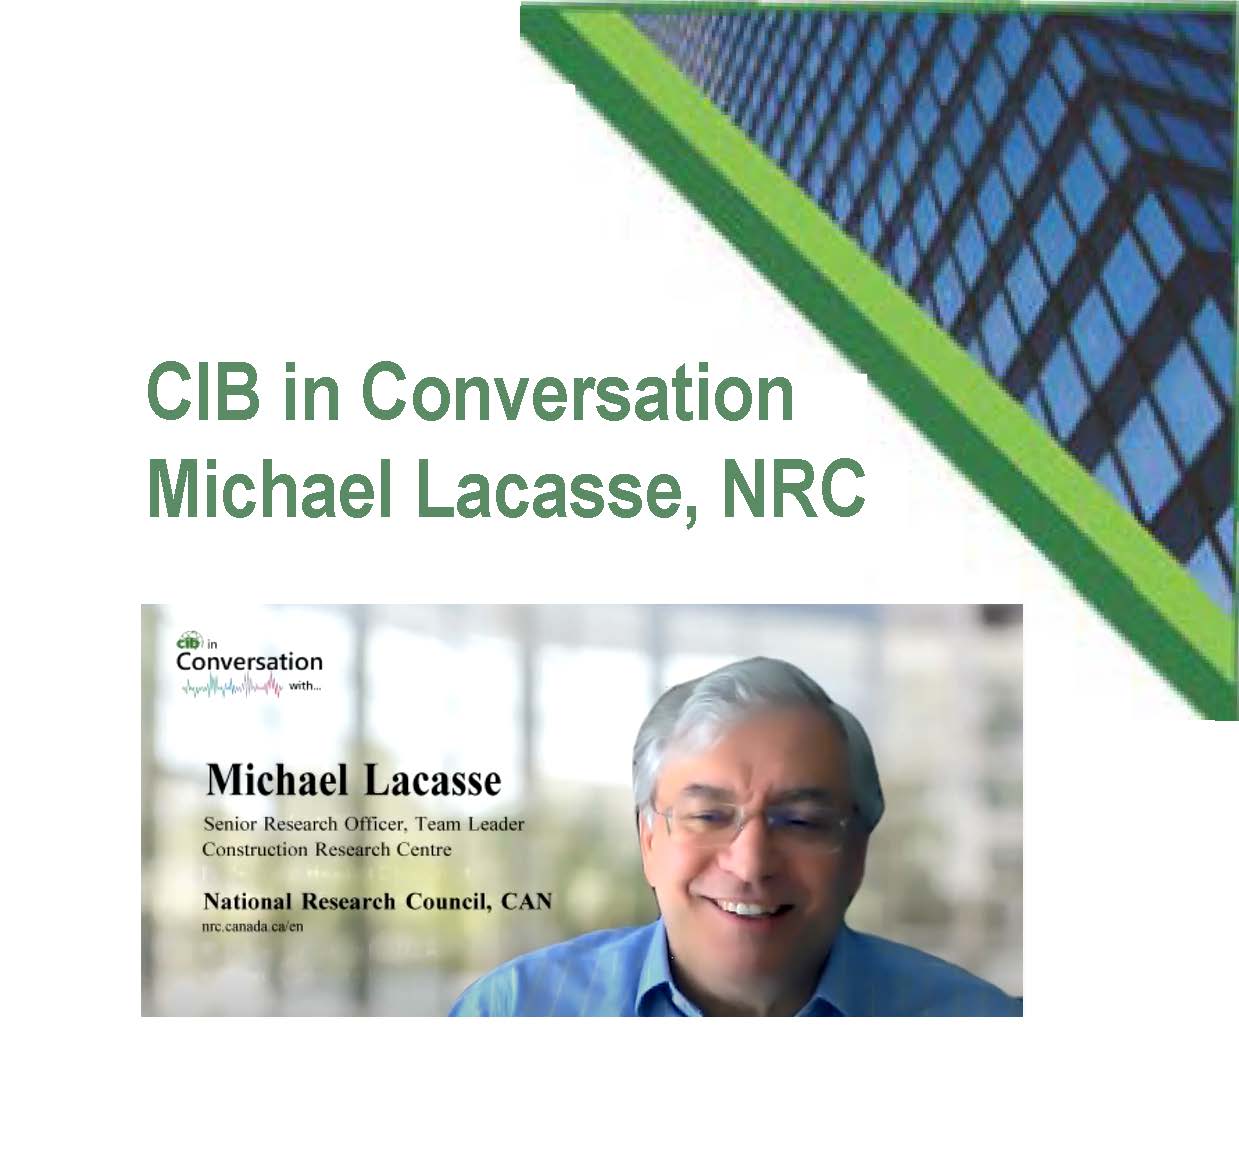 CIB in Conversation Michael Lacasse, National Research Council Canada